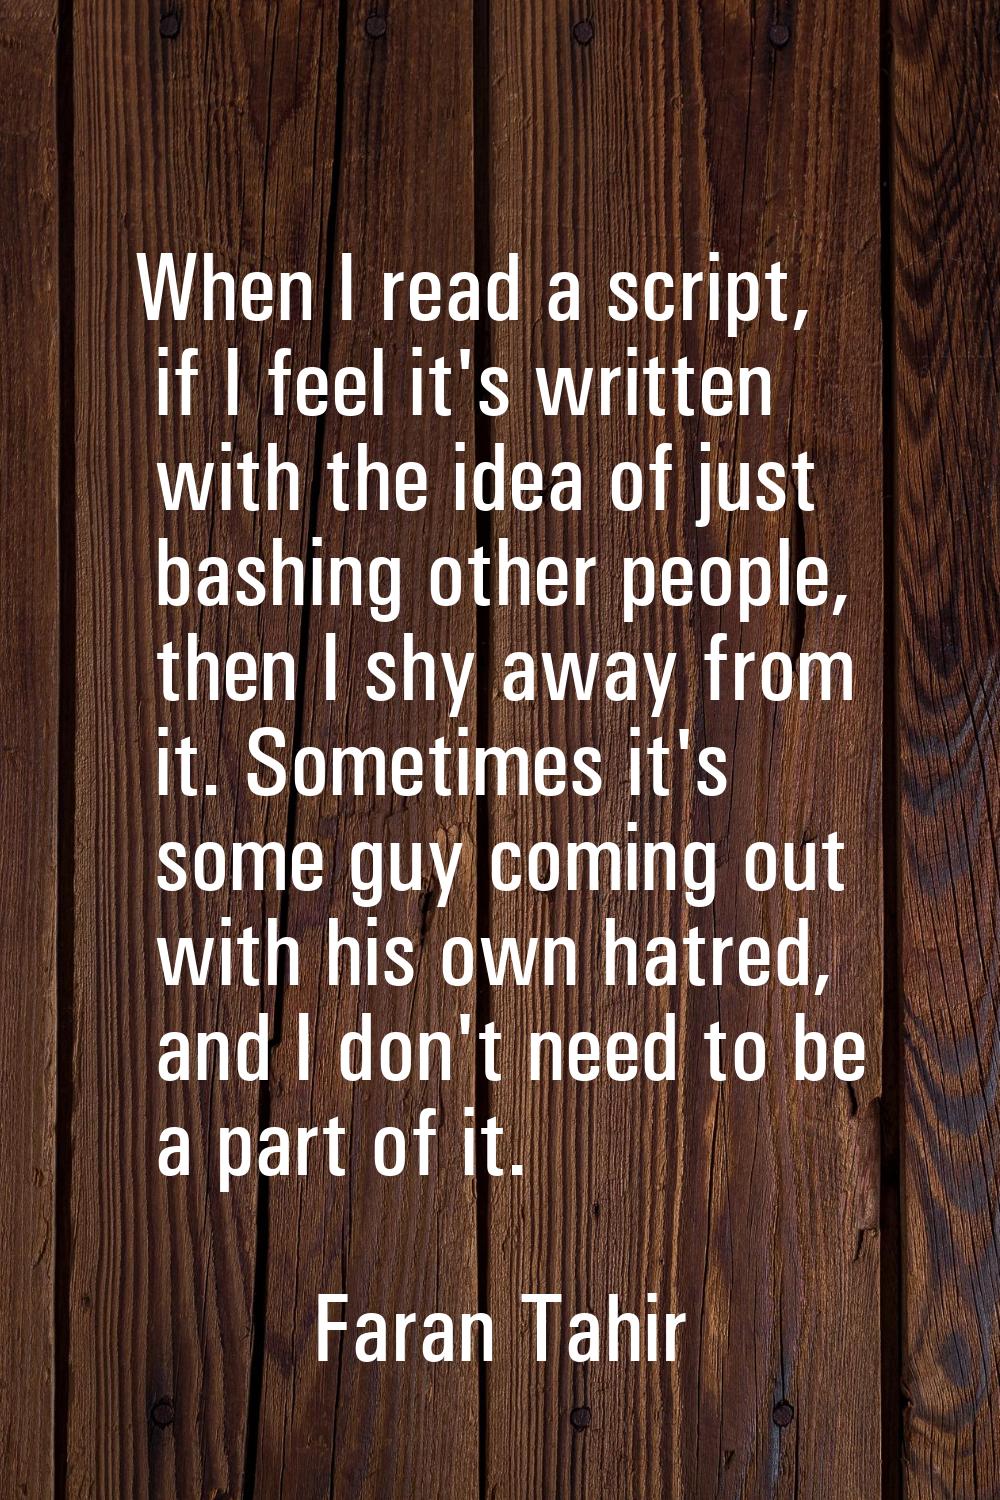 When I read a script, if I feel it's written with the idea of just bashing other people, then I shy